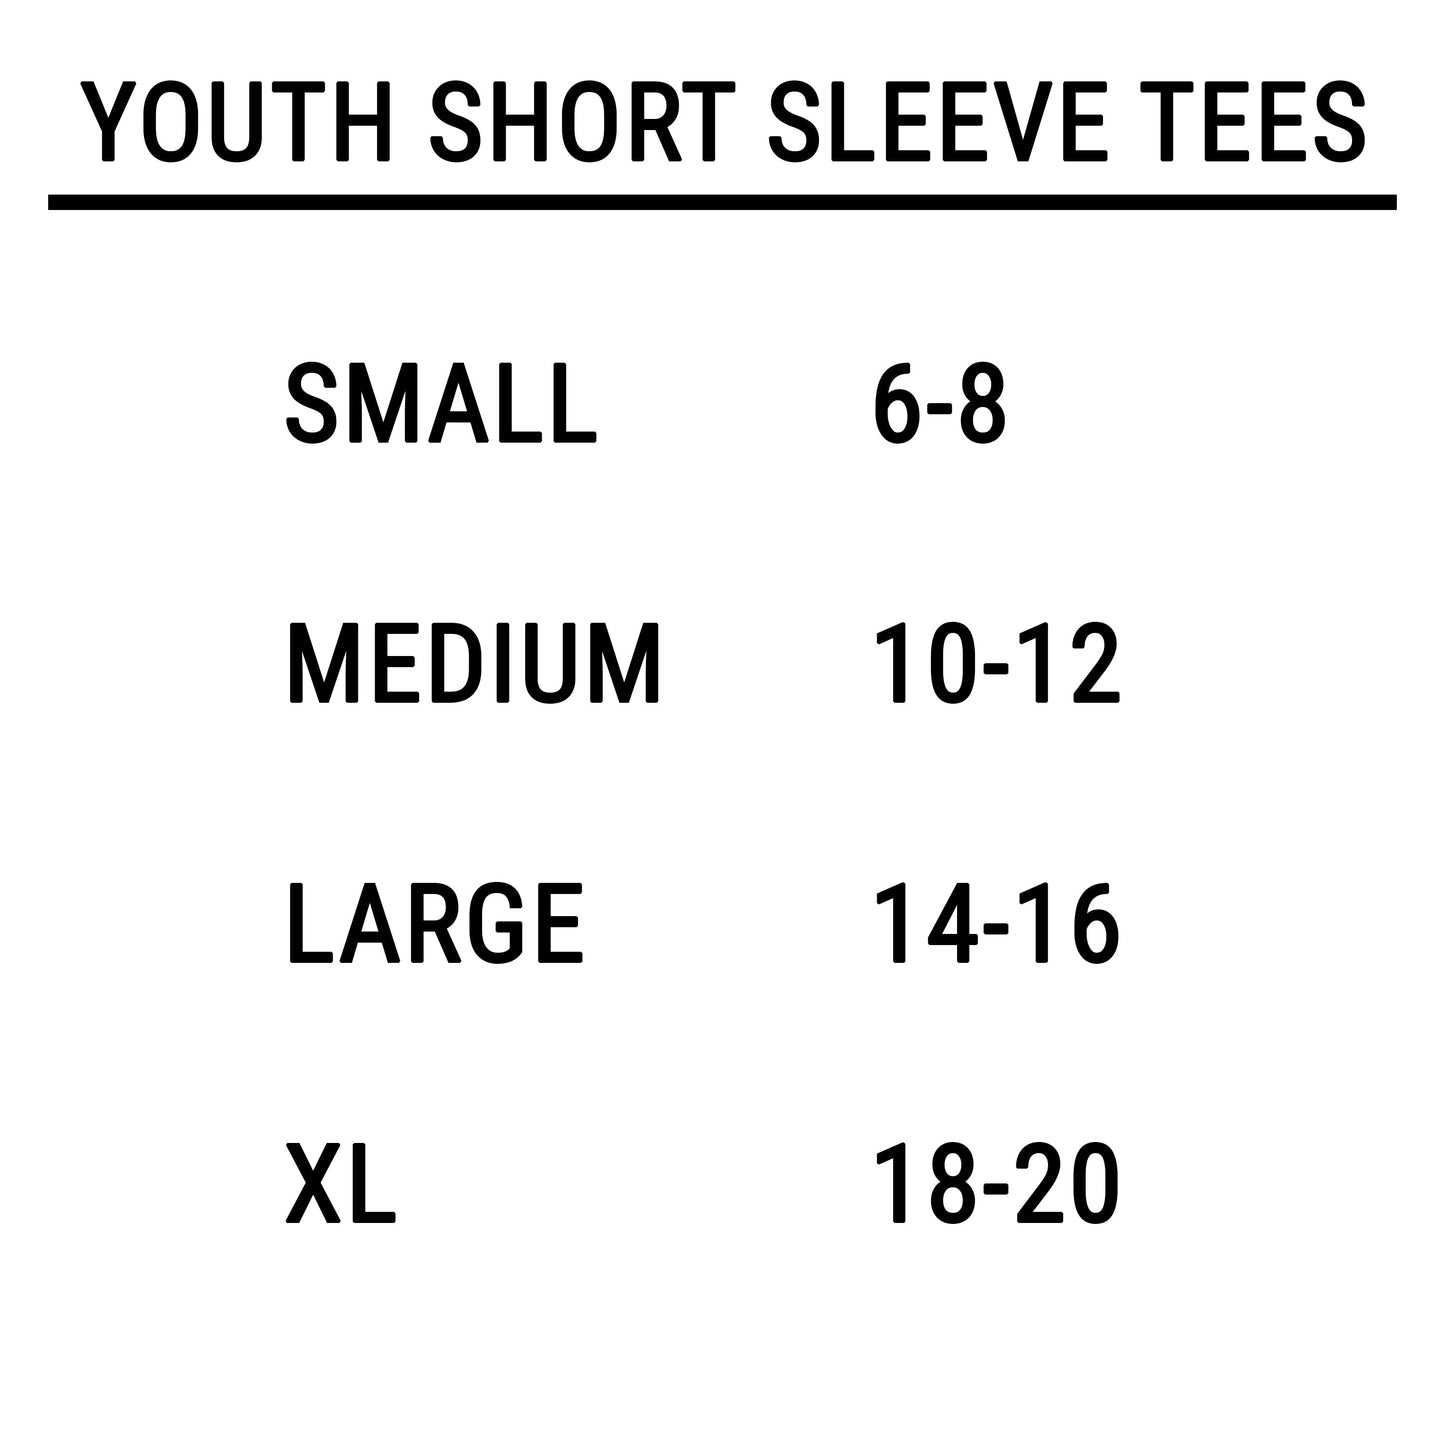 Here To Sleigh | Youth Short Sleeve Crew Neck